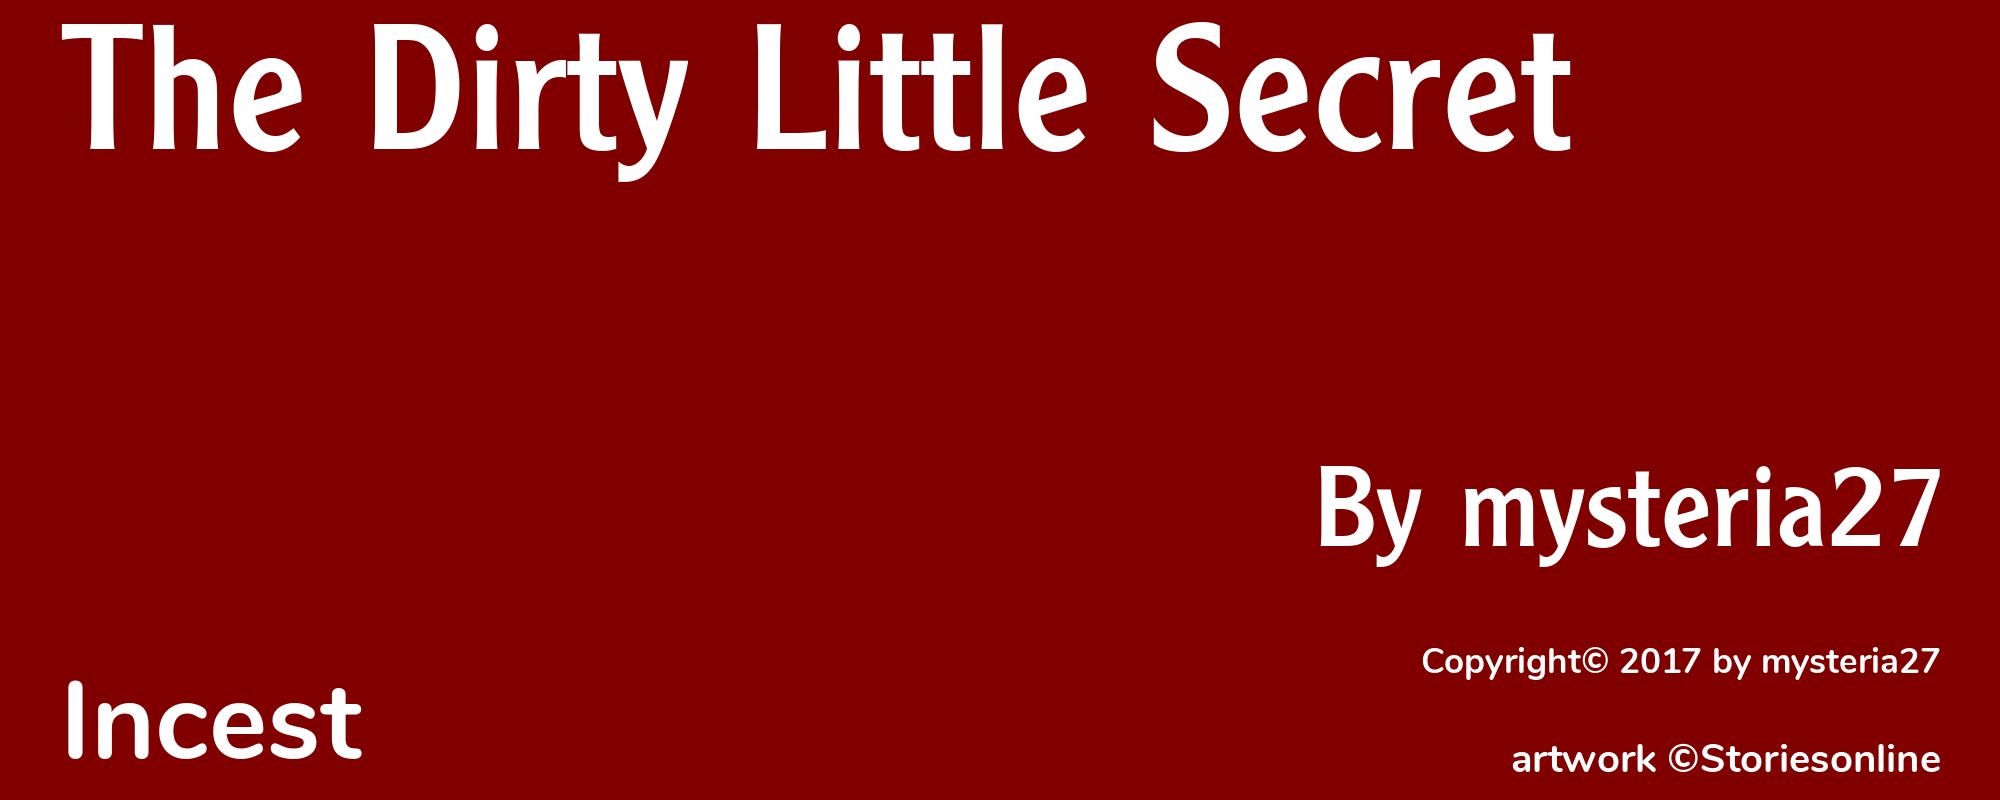 The Dirty Little Secret - Cover